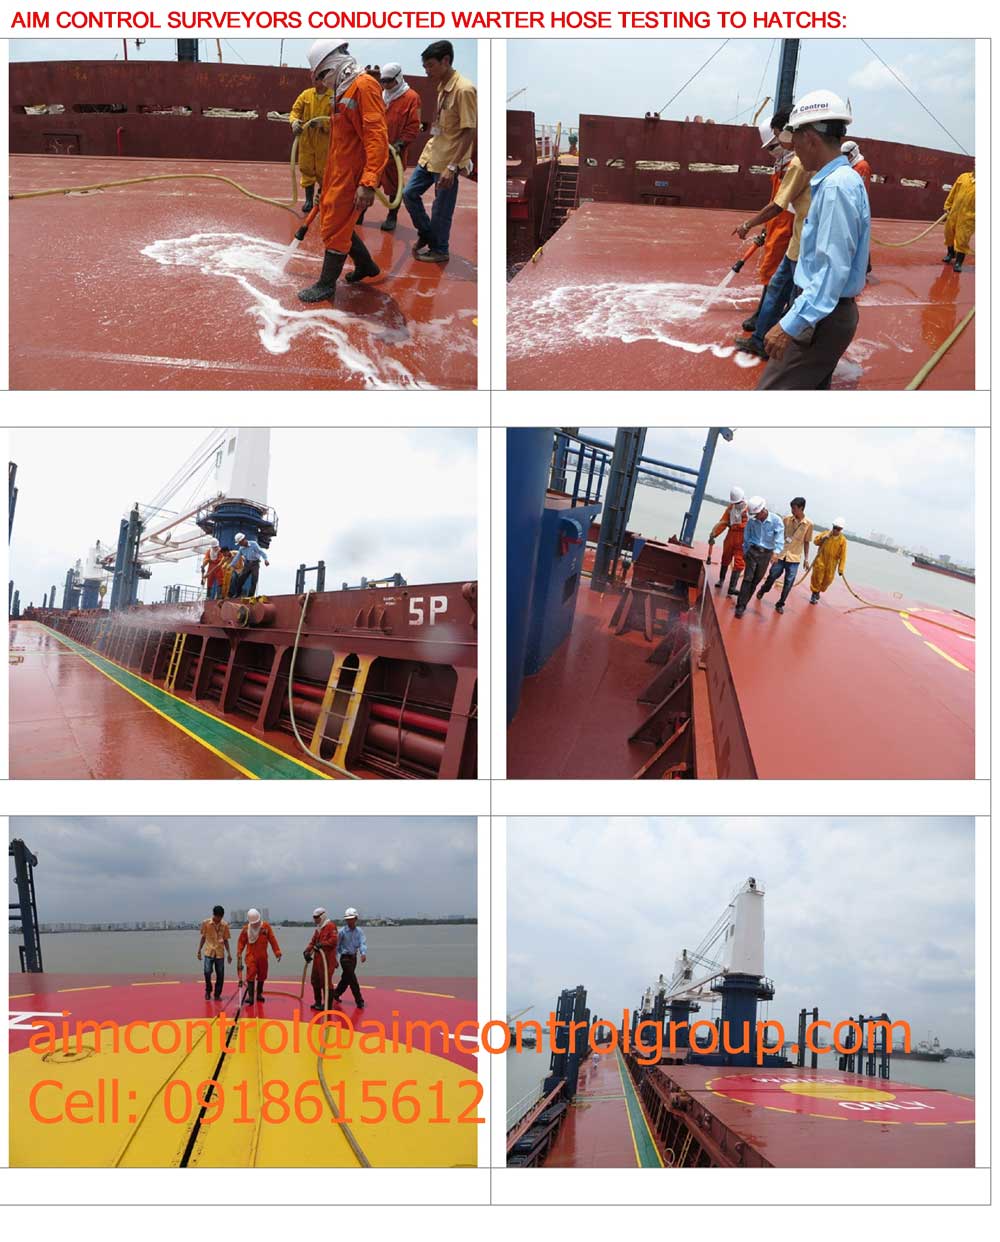 Hatch-covers-water-hose-testing-survey-inspection